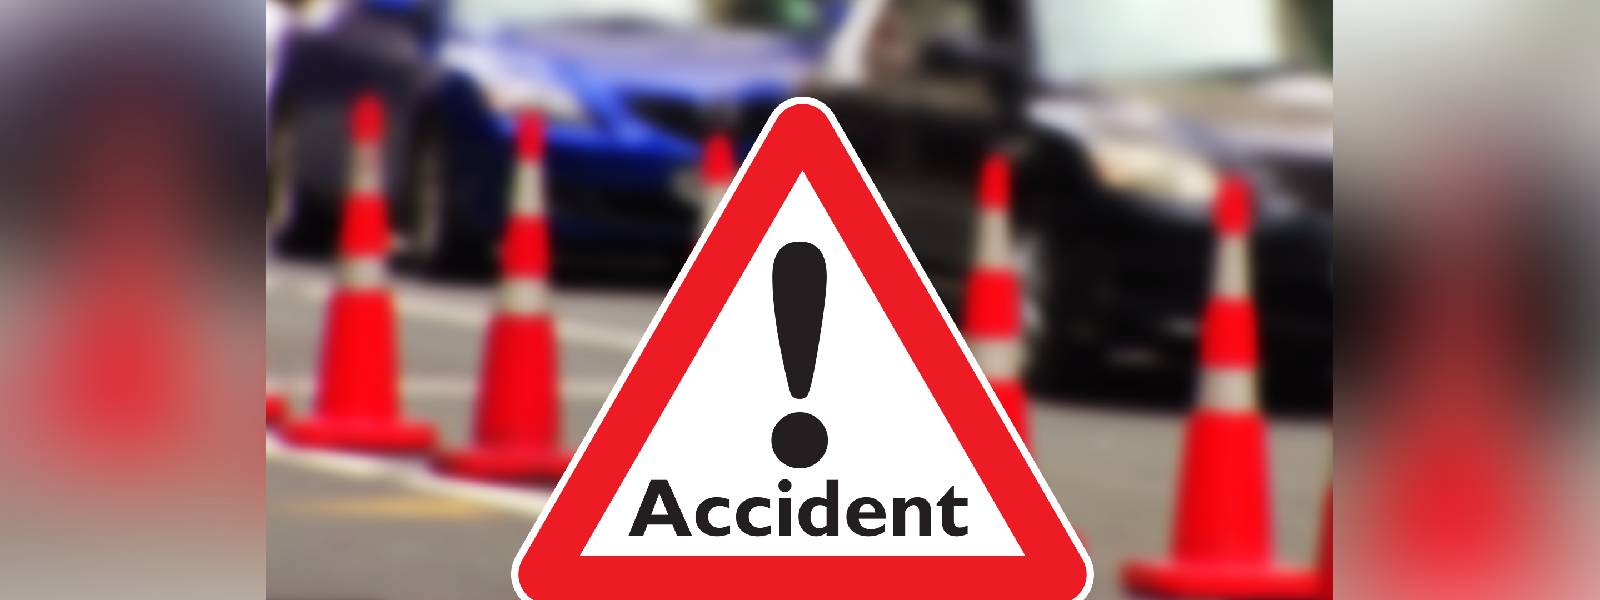 Accident in Wanawasala, Train operations delayed